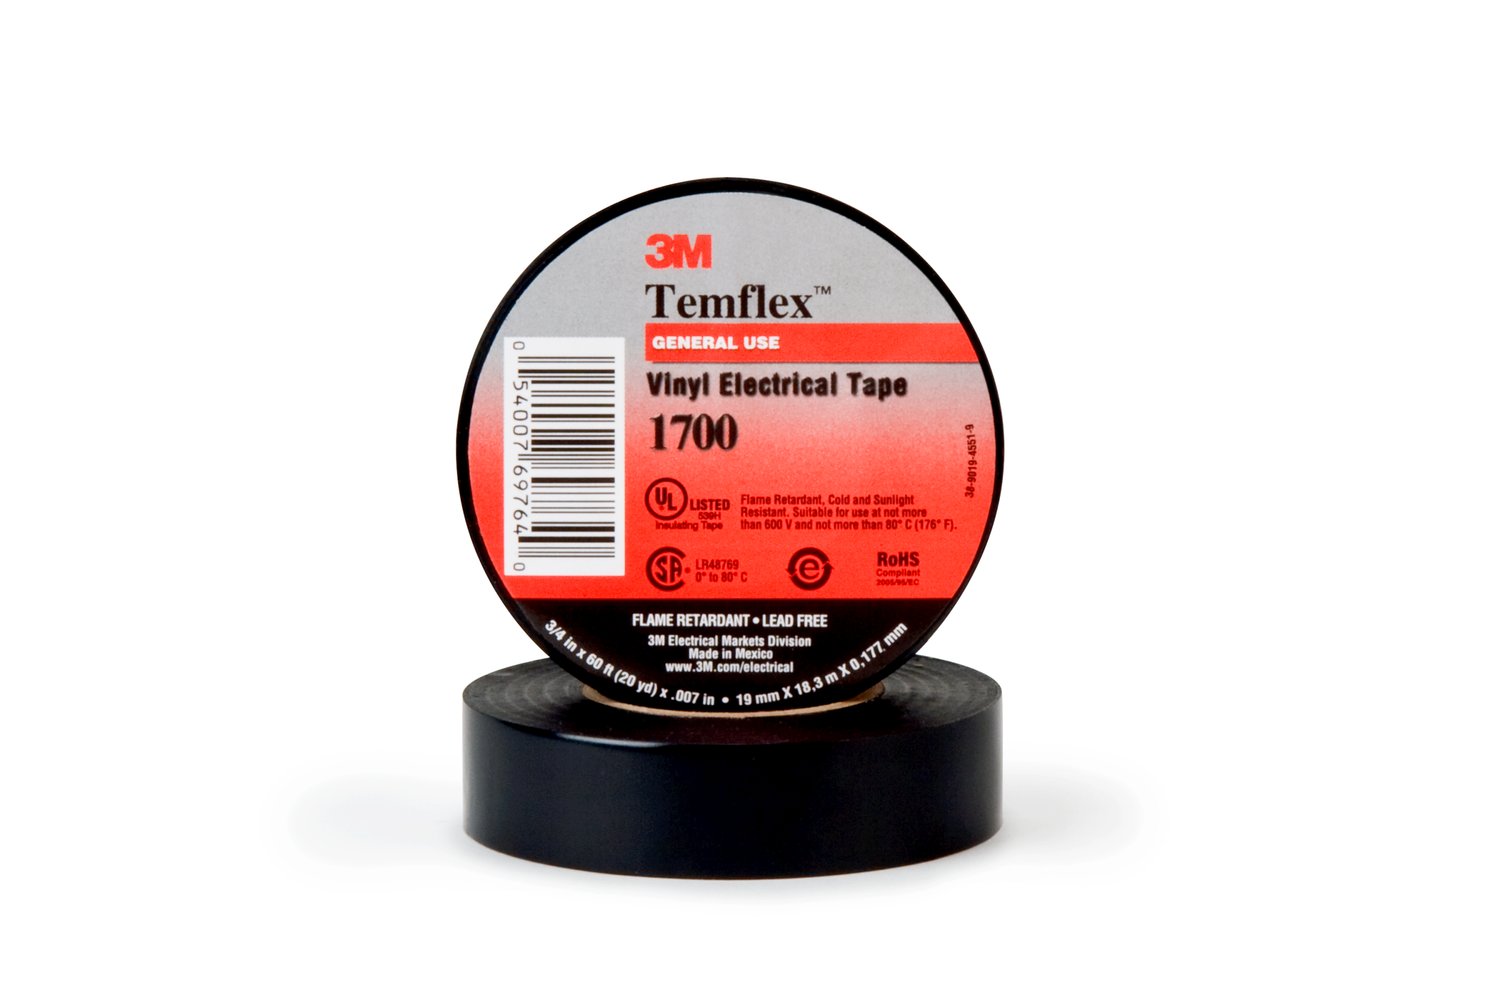 1/4" 3M Temflex 1700 Vinyl Electrical Tape with Non-Thermosetting Rubber Adhesive, black, 1/4" wide x  60 FT roll